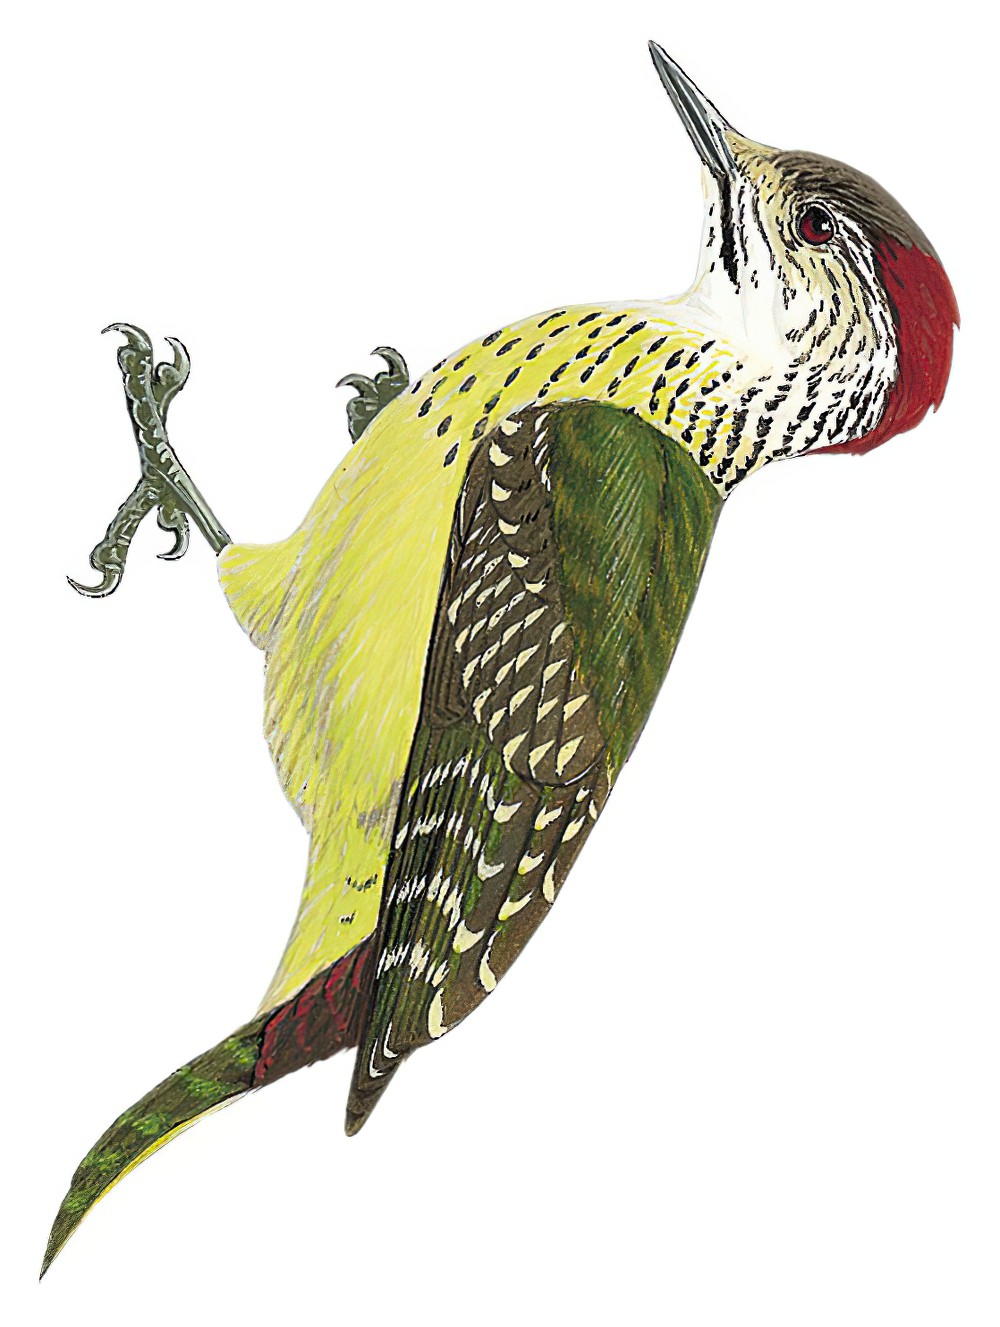 Speckle-breasted Woodpecker / Chloropicus poecilolaemus